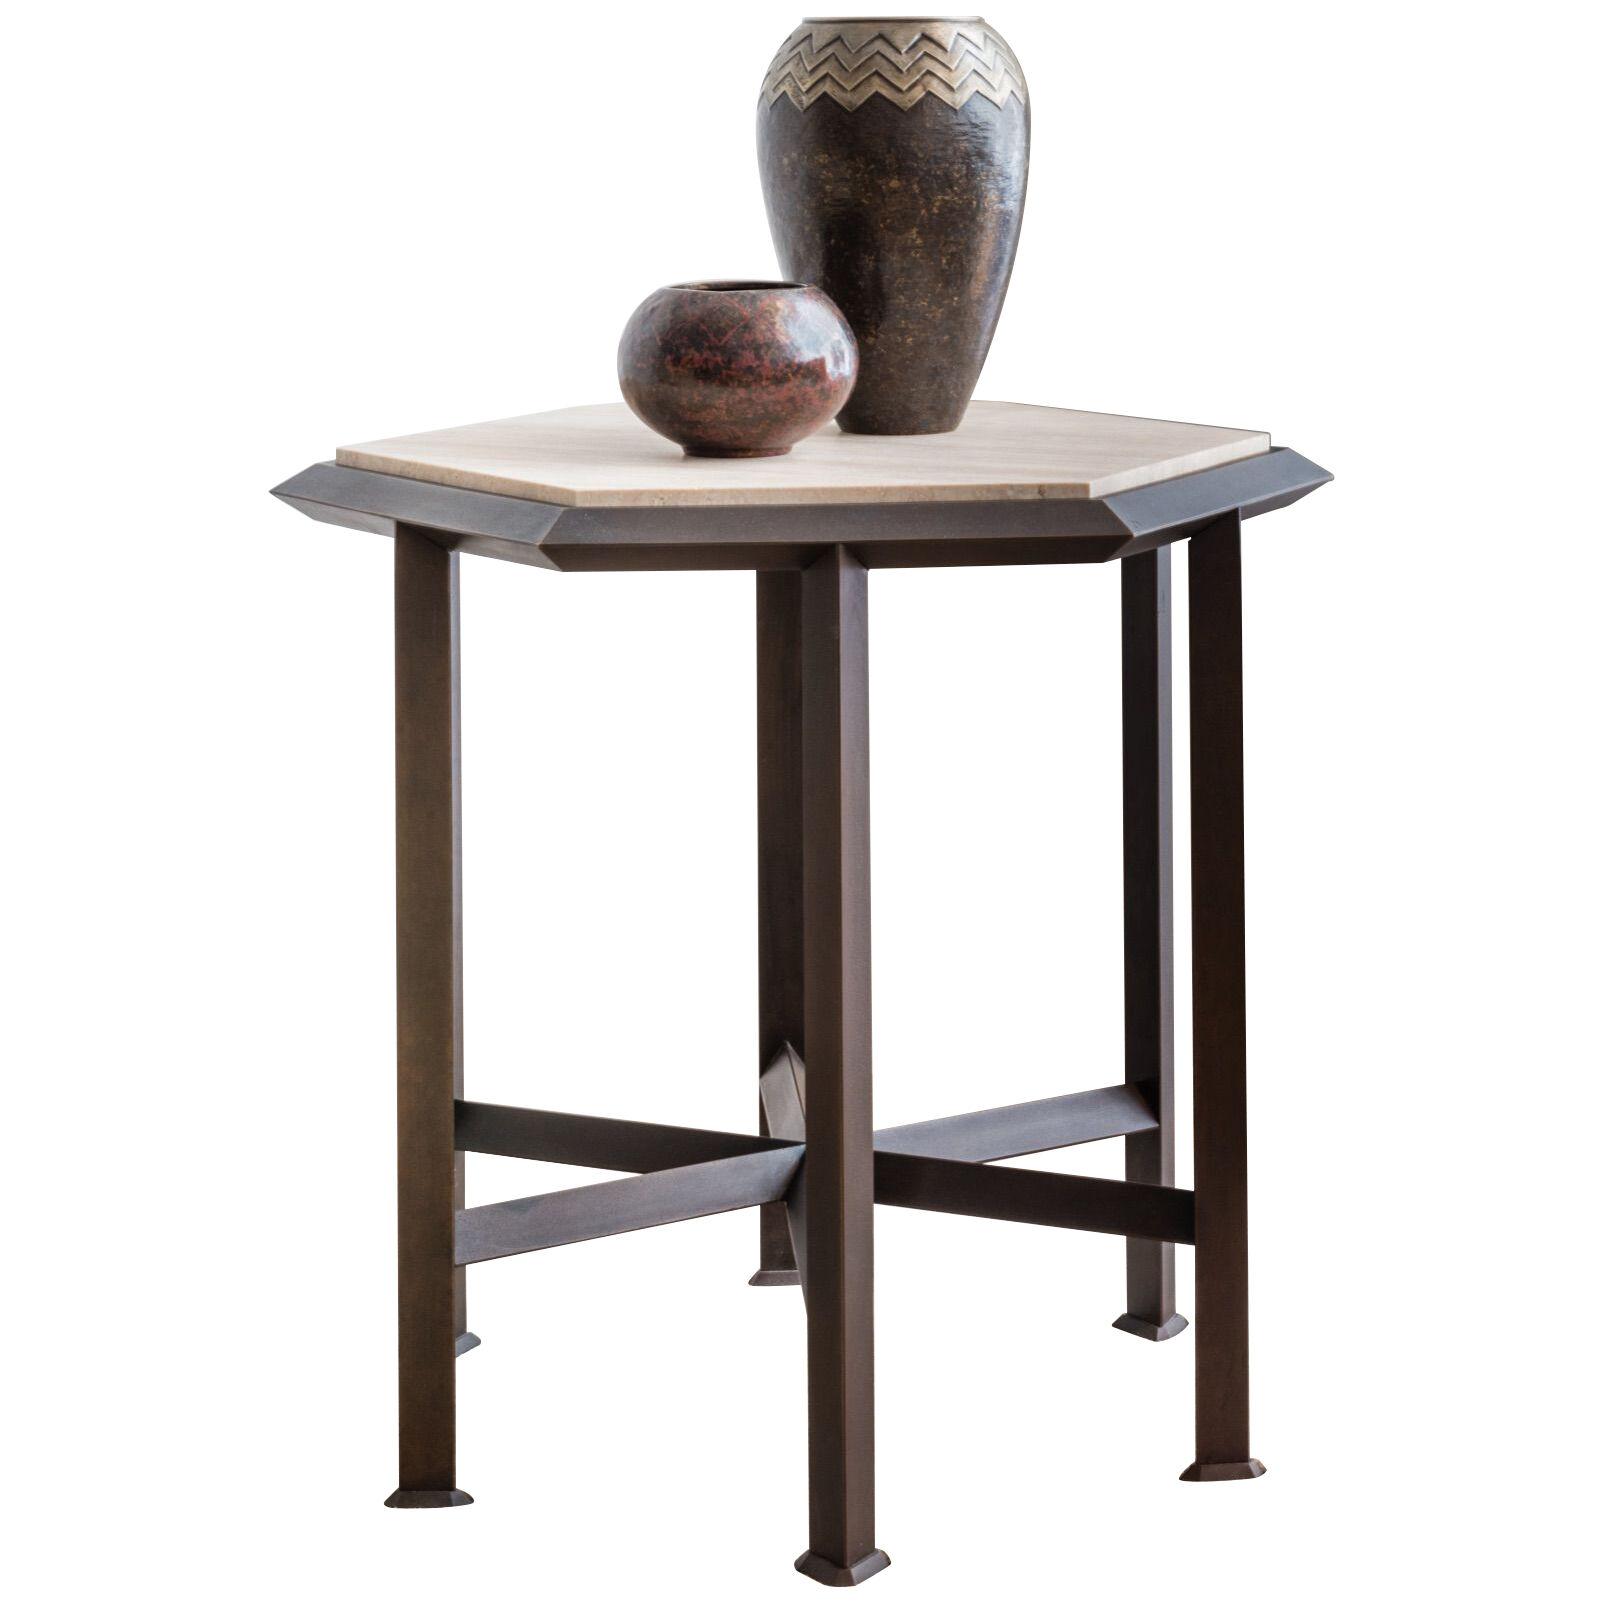 Small Pedestal Table "Orion" by Nicolas Aubagnac, 2020. Limited Edition